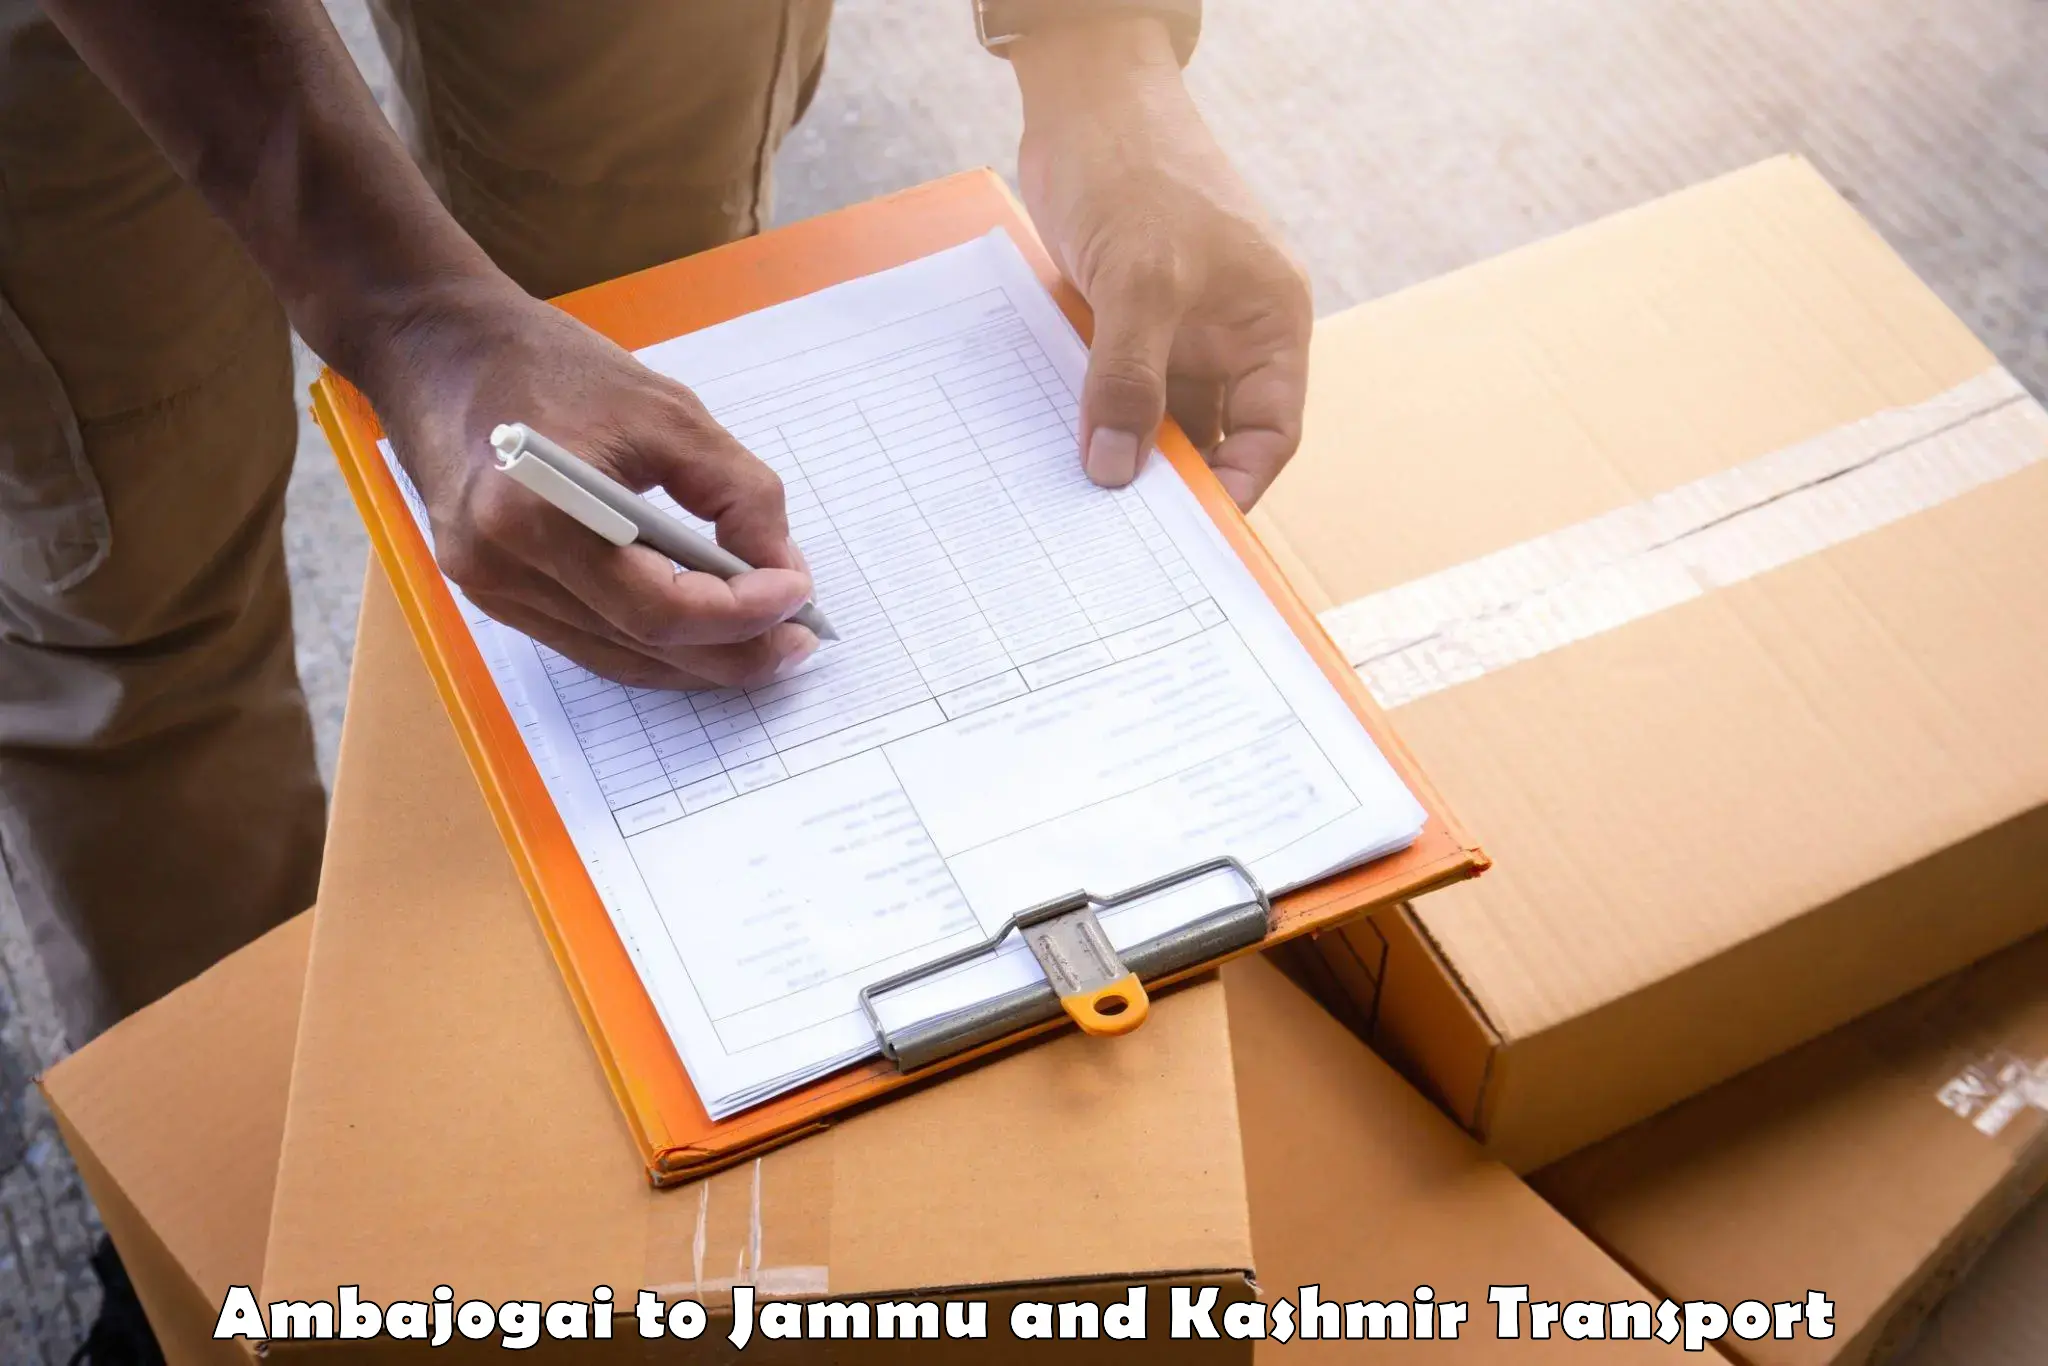 Express transport services in Ambajogai to Jammu and Kashmir